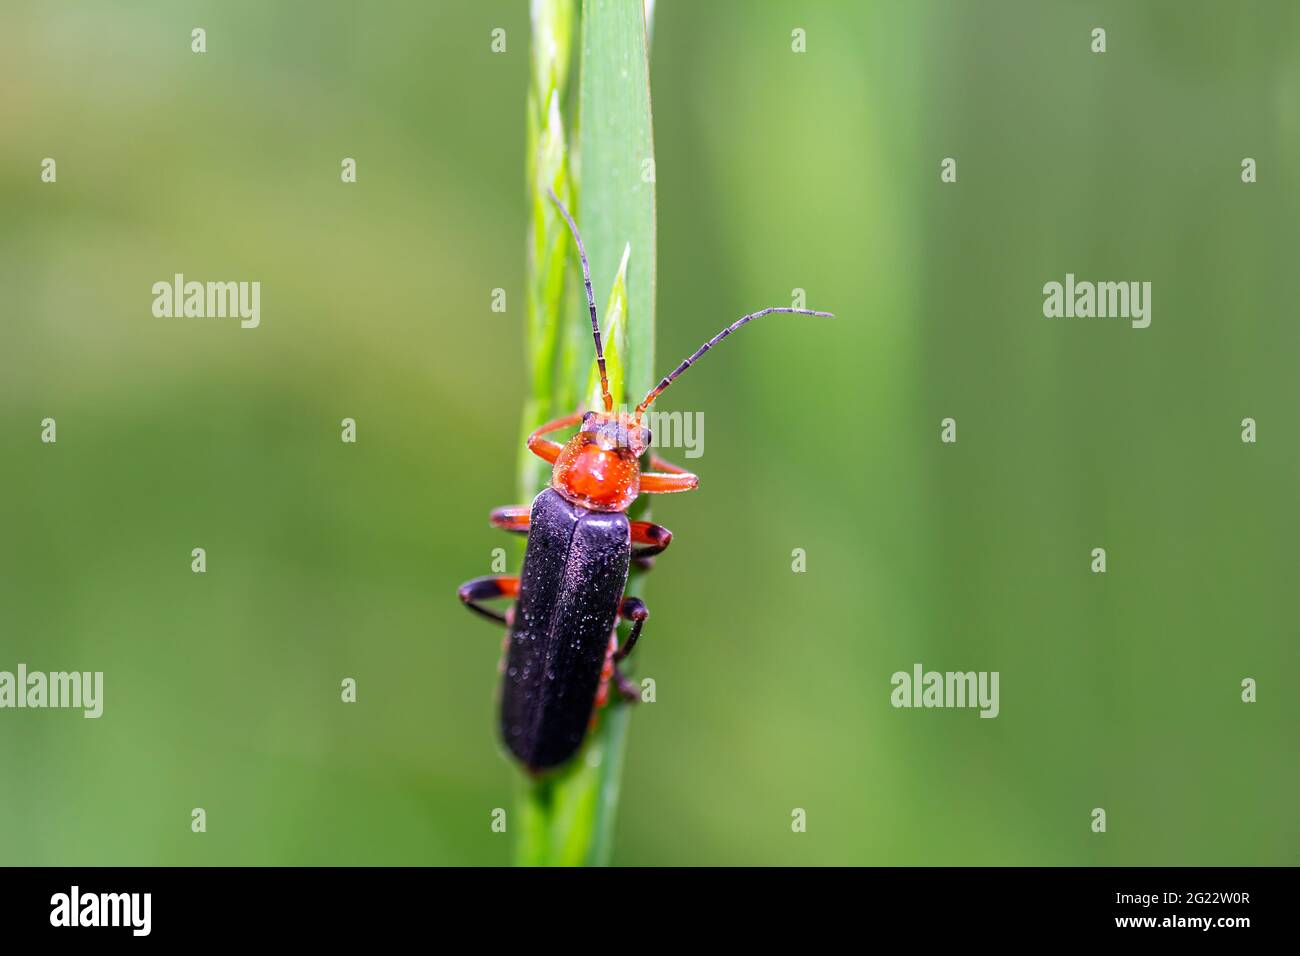 Soldier beetle, cantharis rustica sitting on grass stem. Macro photo small bug Stock Photo